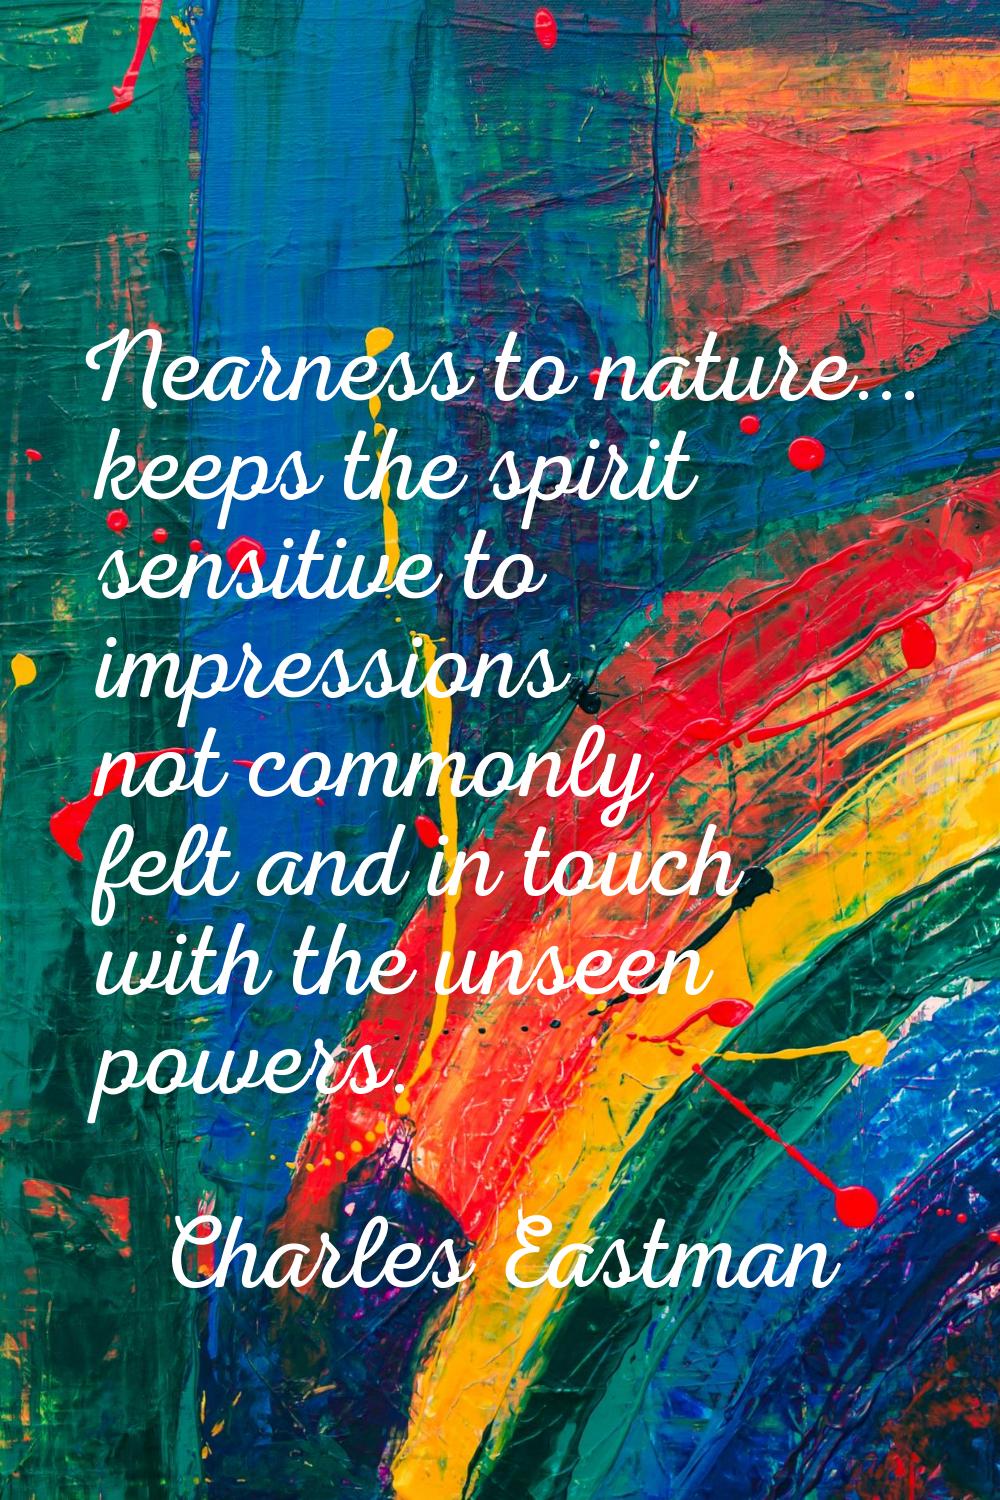 Nearness to nature... keeps the spirit sensitive to impressions not commonly felt and in touch with